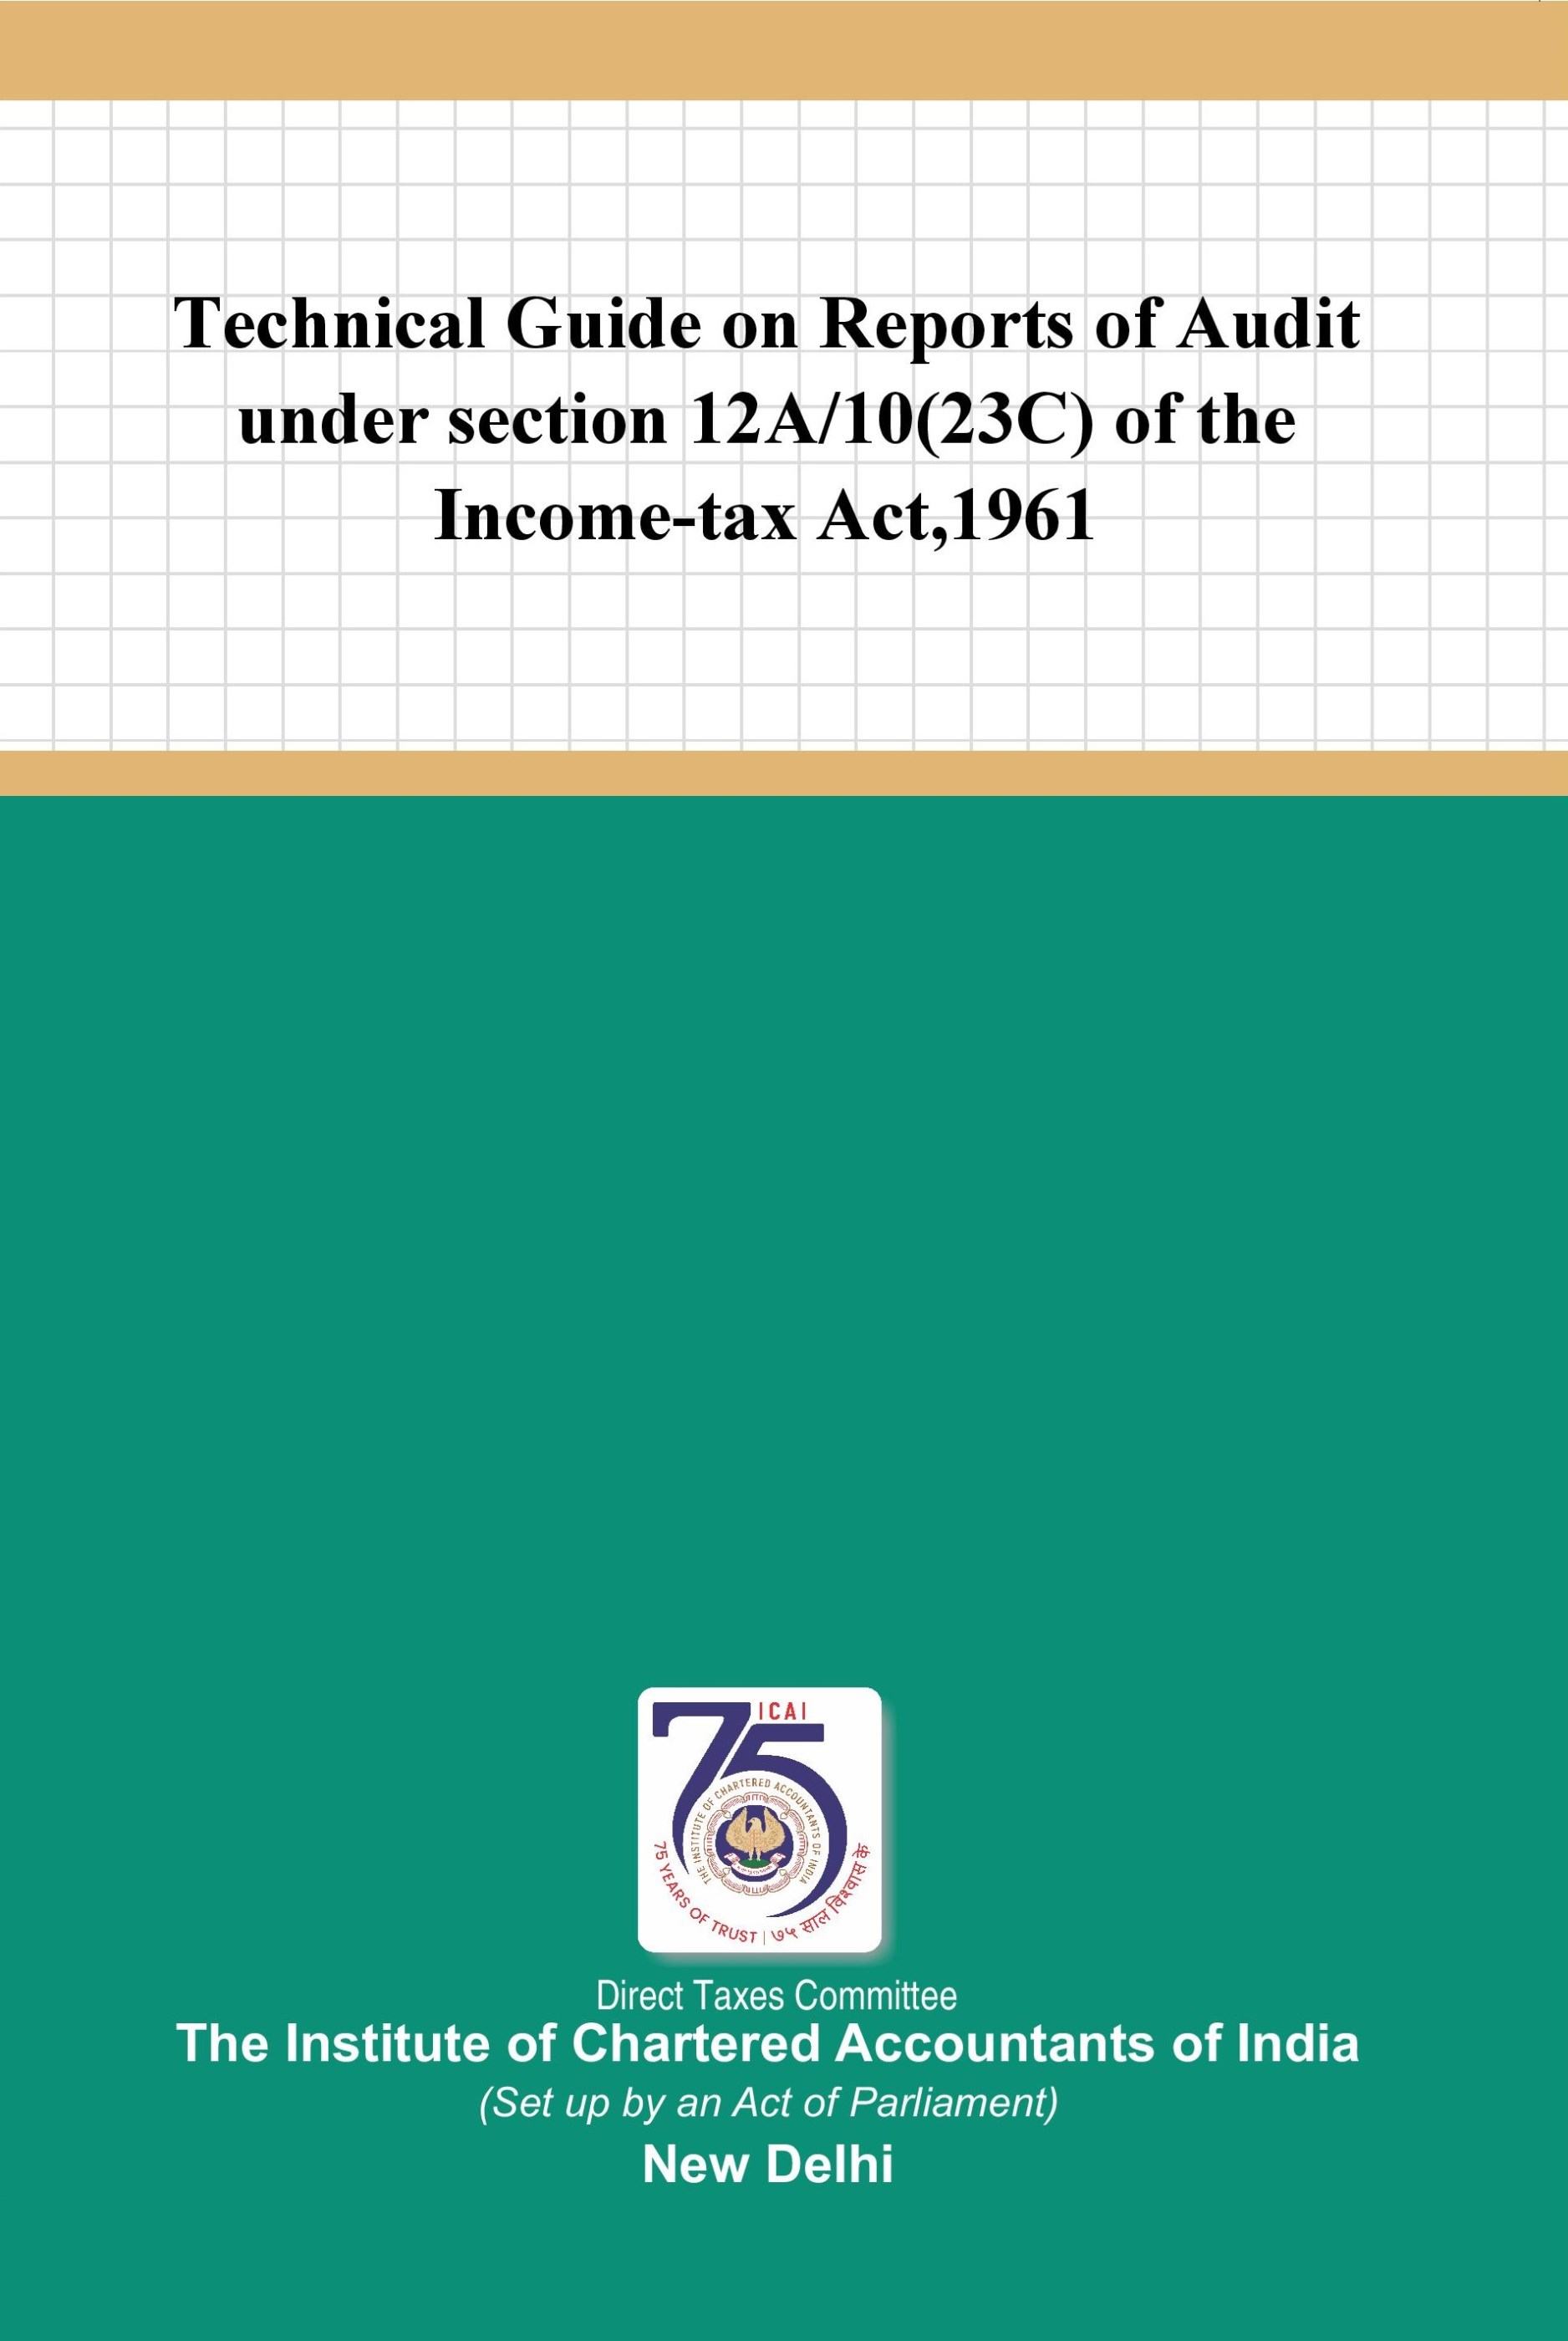 Technical Guide on Reports of Audit under Section 12A/10 (23C) of the Income-tax Act, 1961 (October, 2023)